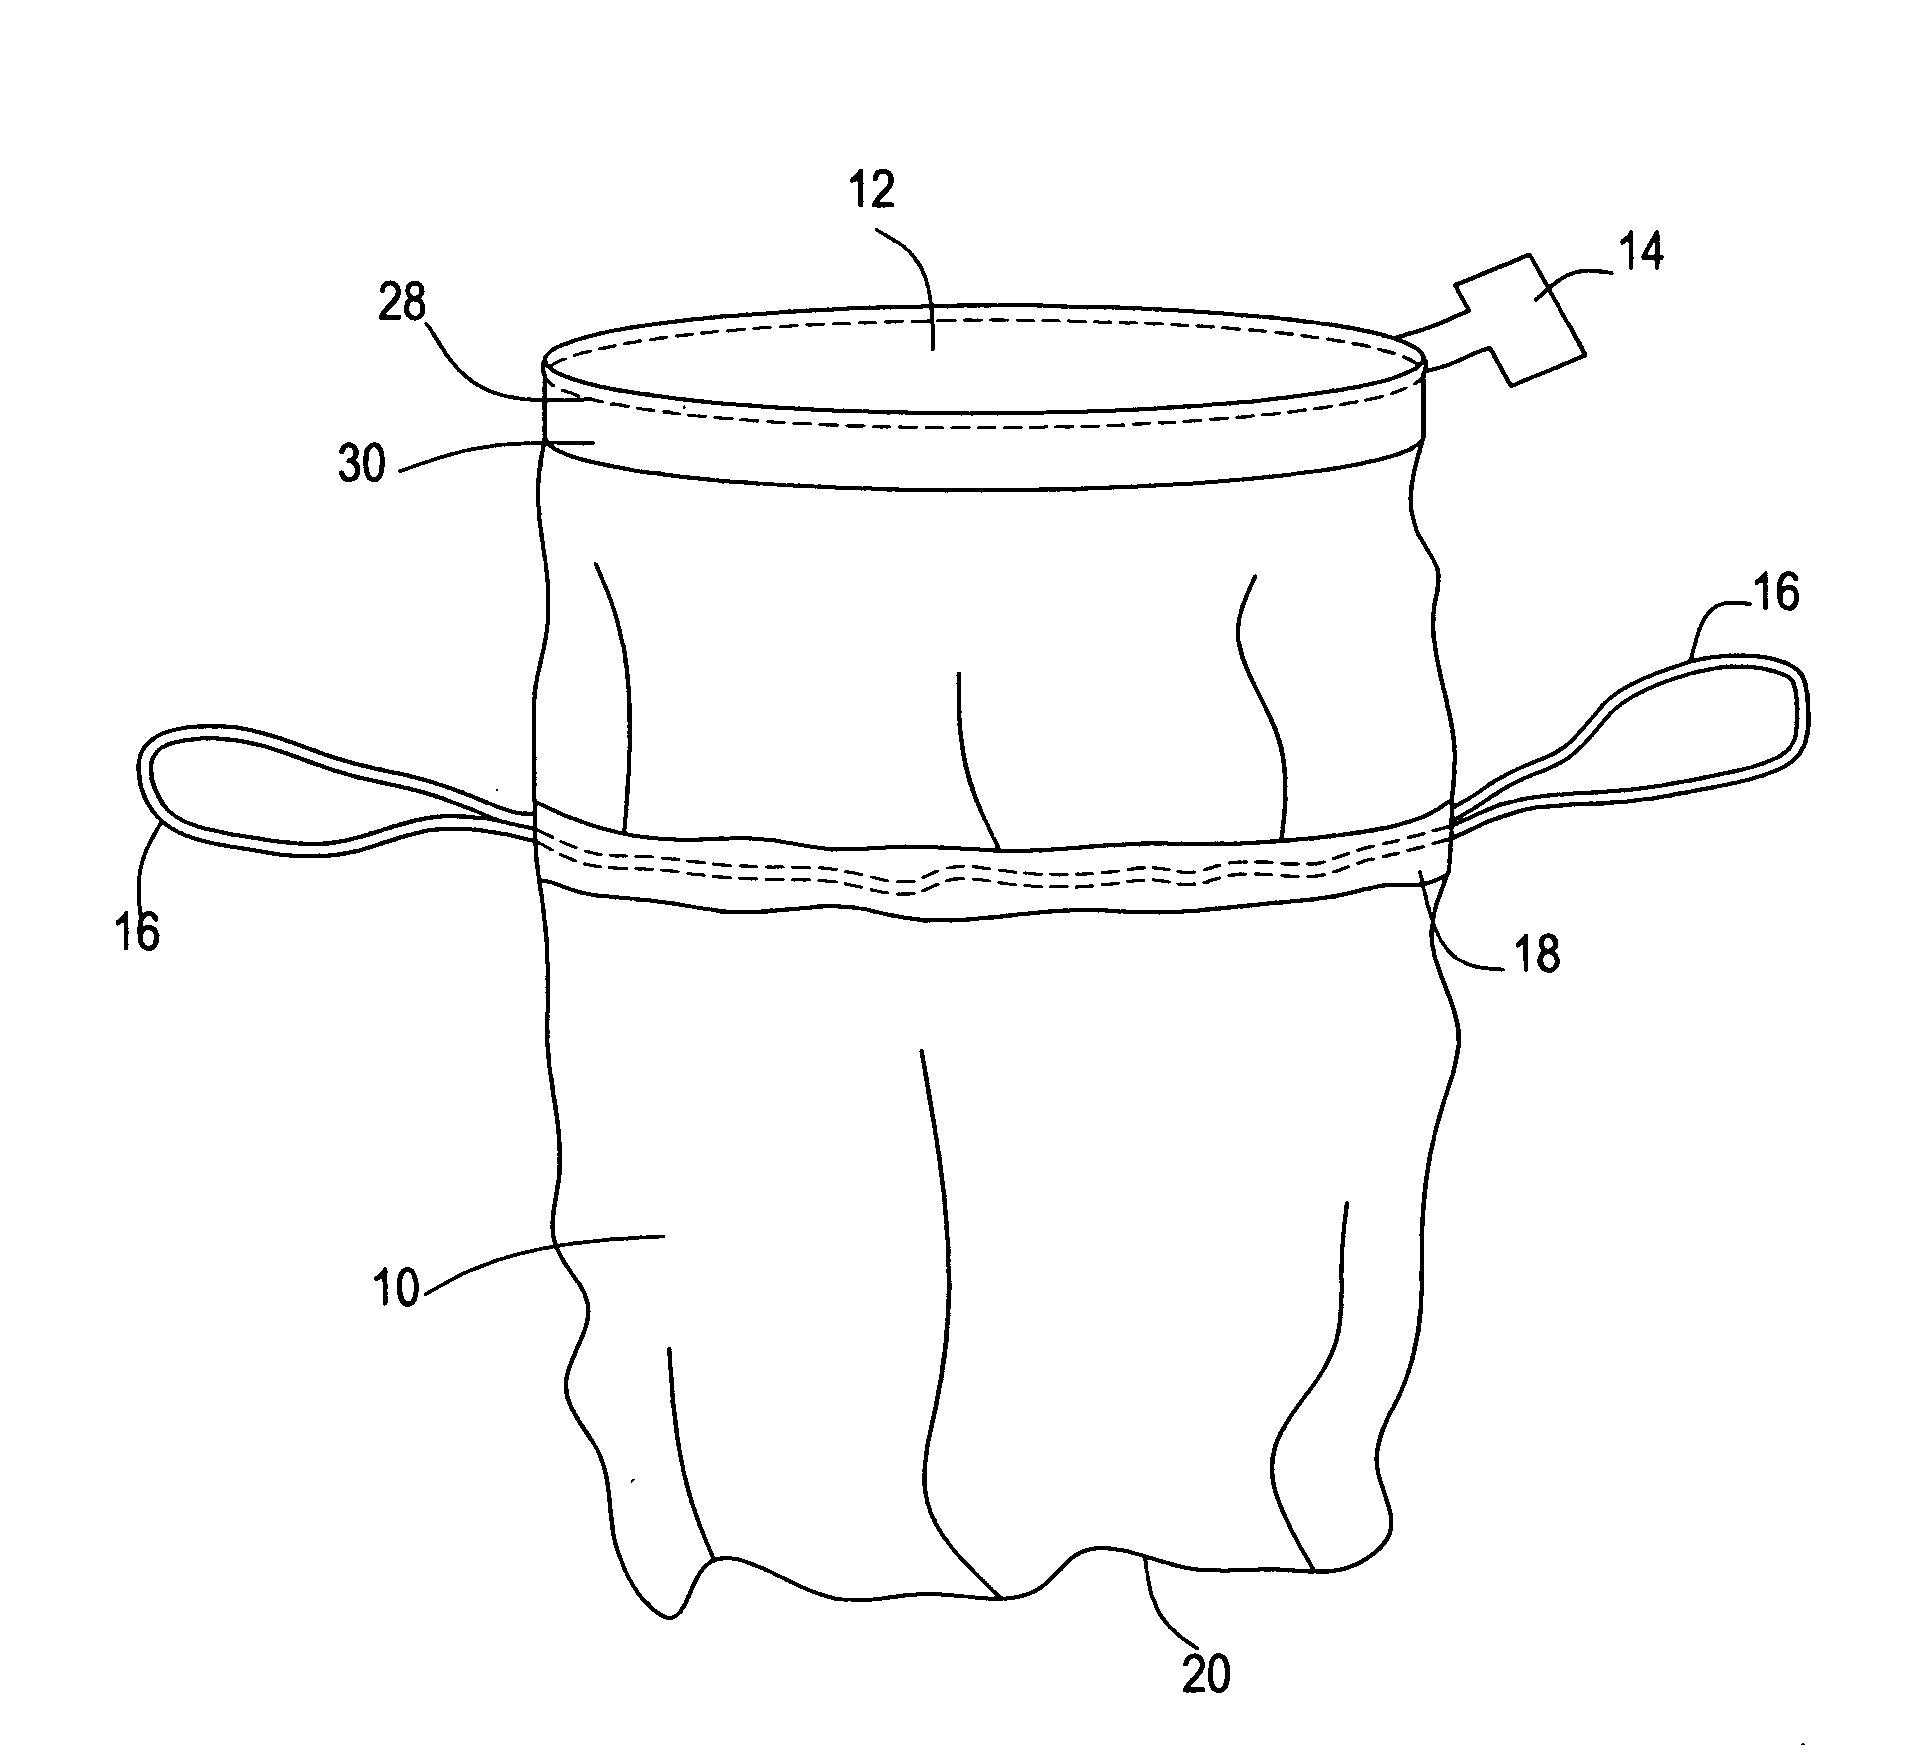 Portable rapidly deployable waste containment device